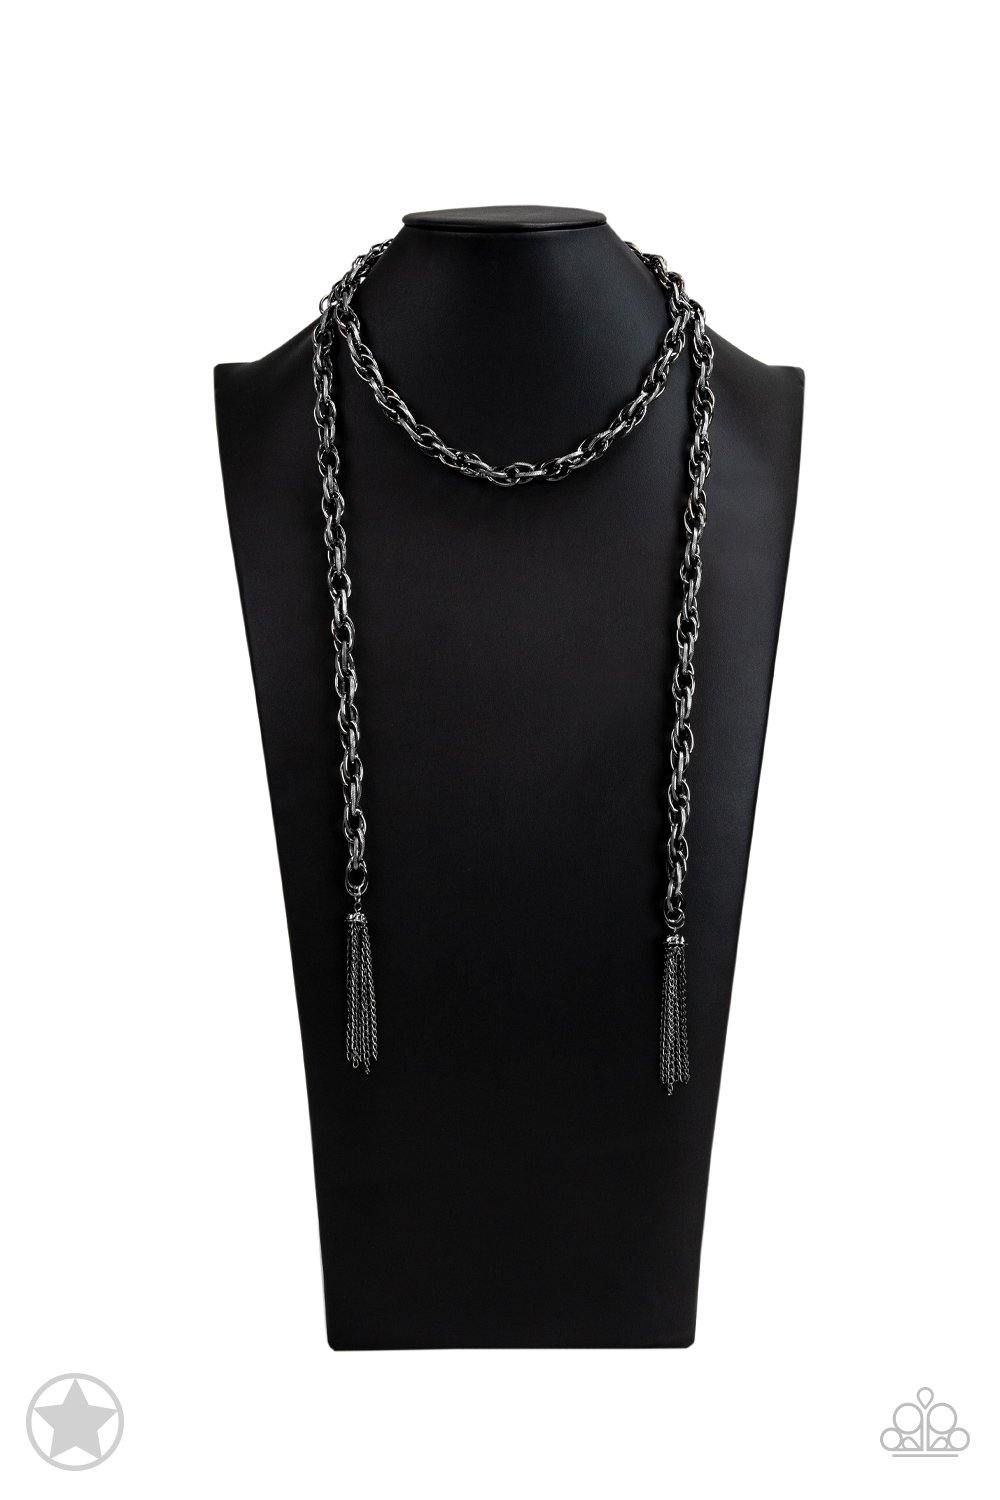 SCARFed for Attention - Gunmetal - Flauless Bling Boutique